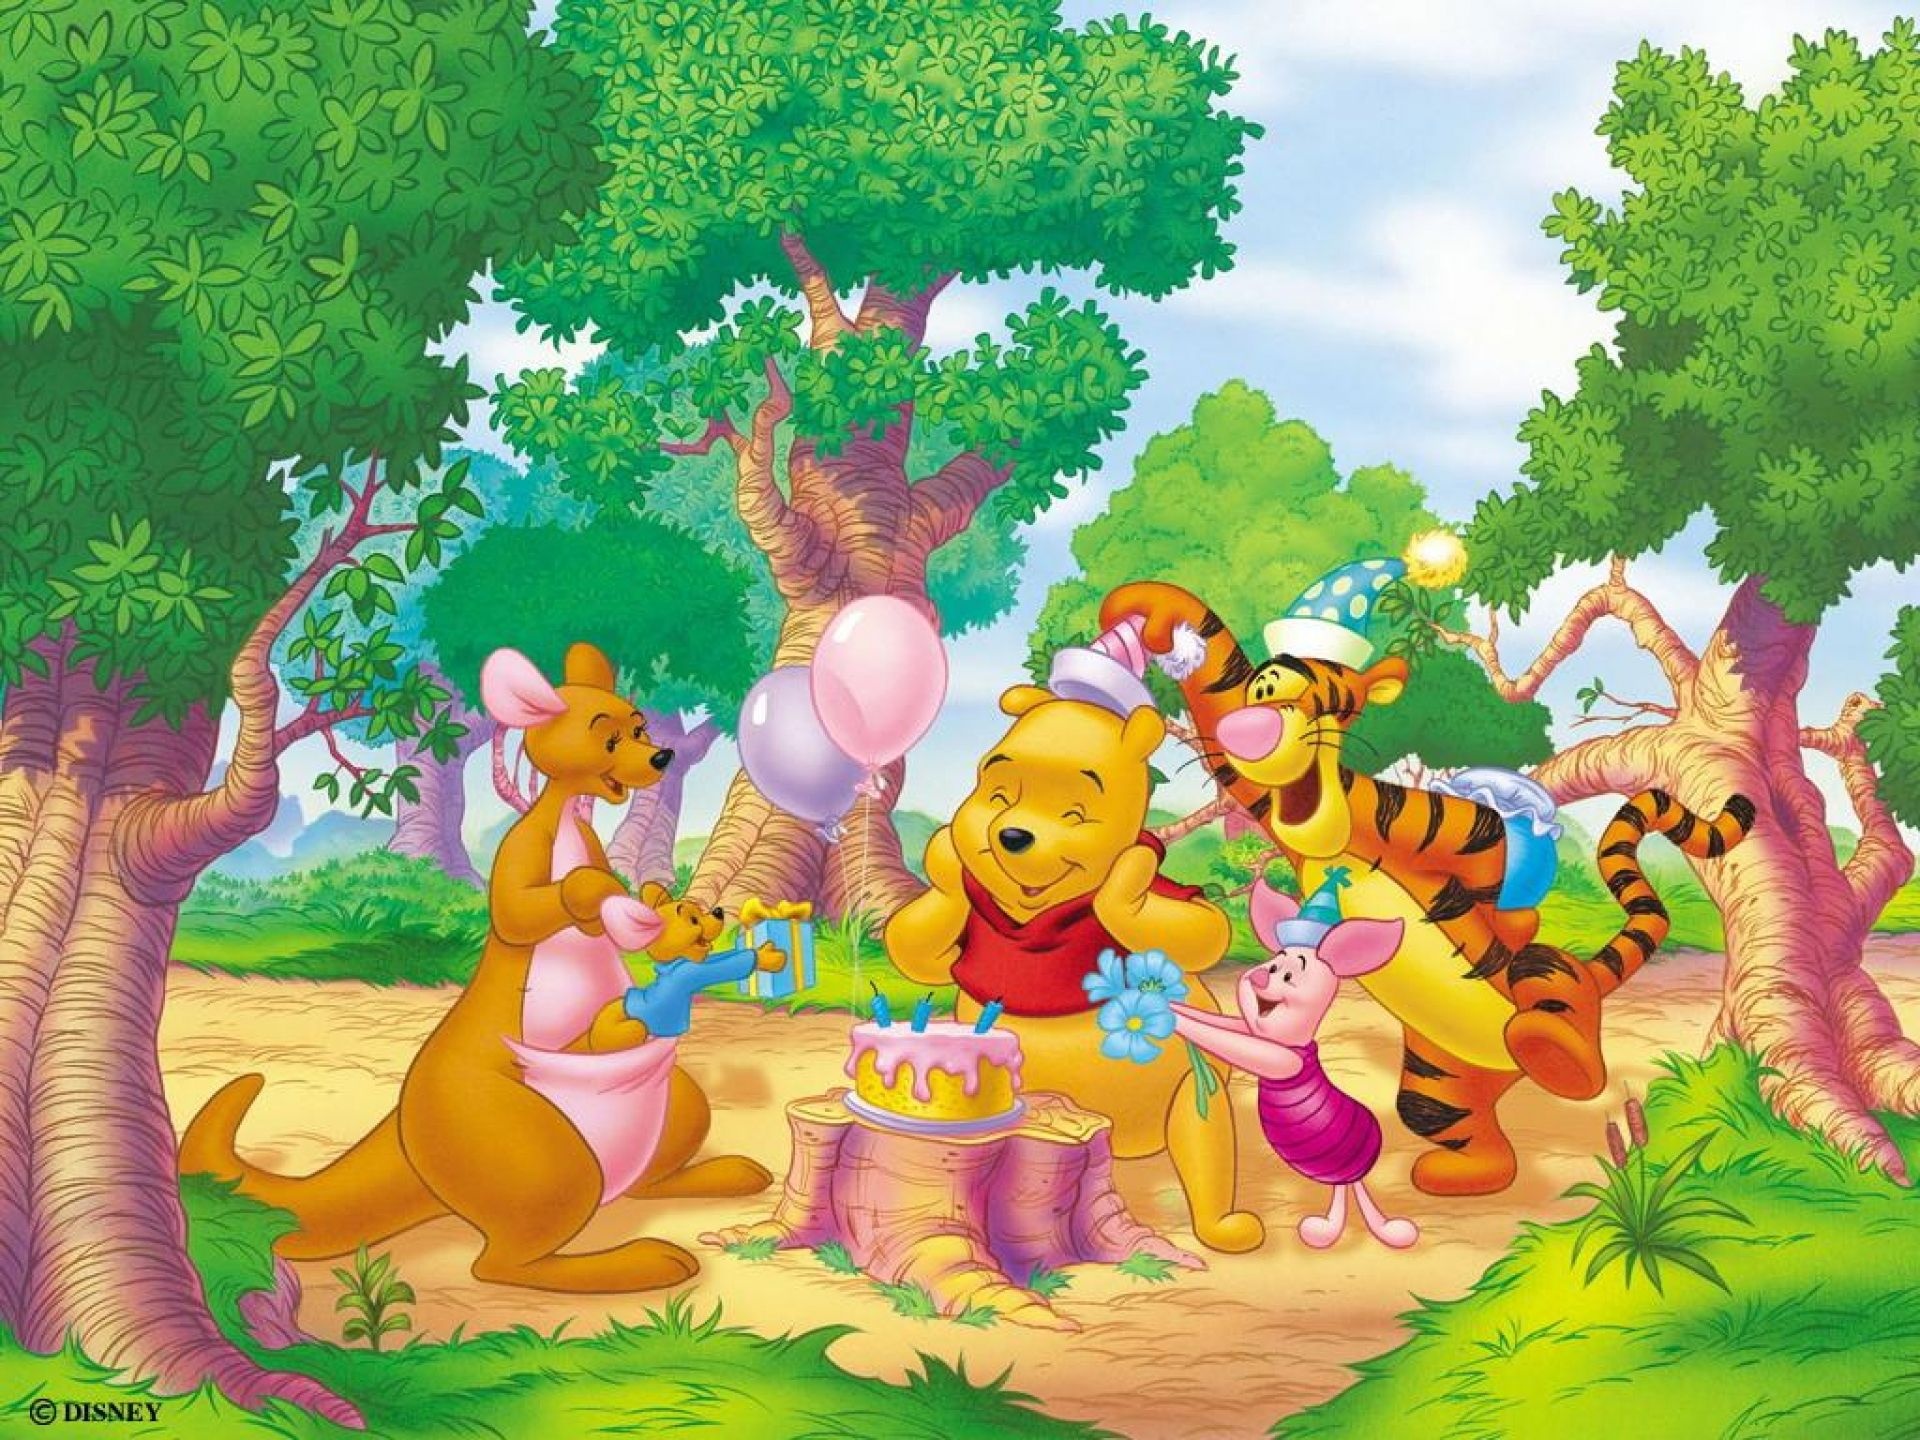 Winnie the Pooh, Character wallpapers, Adorable illustrations, Whimsical charm, 1920x1440 HD Desktop